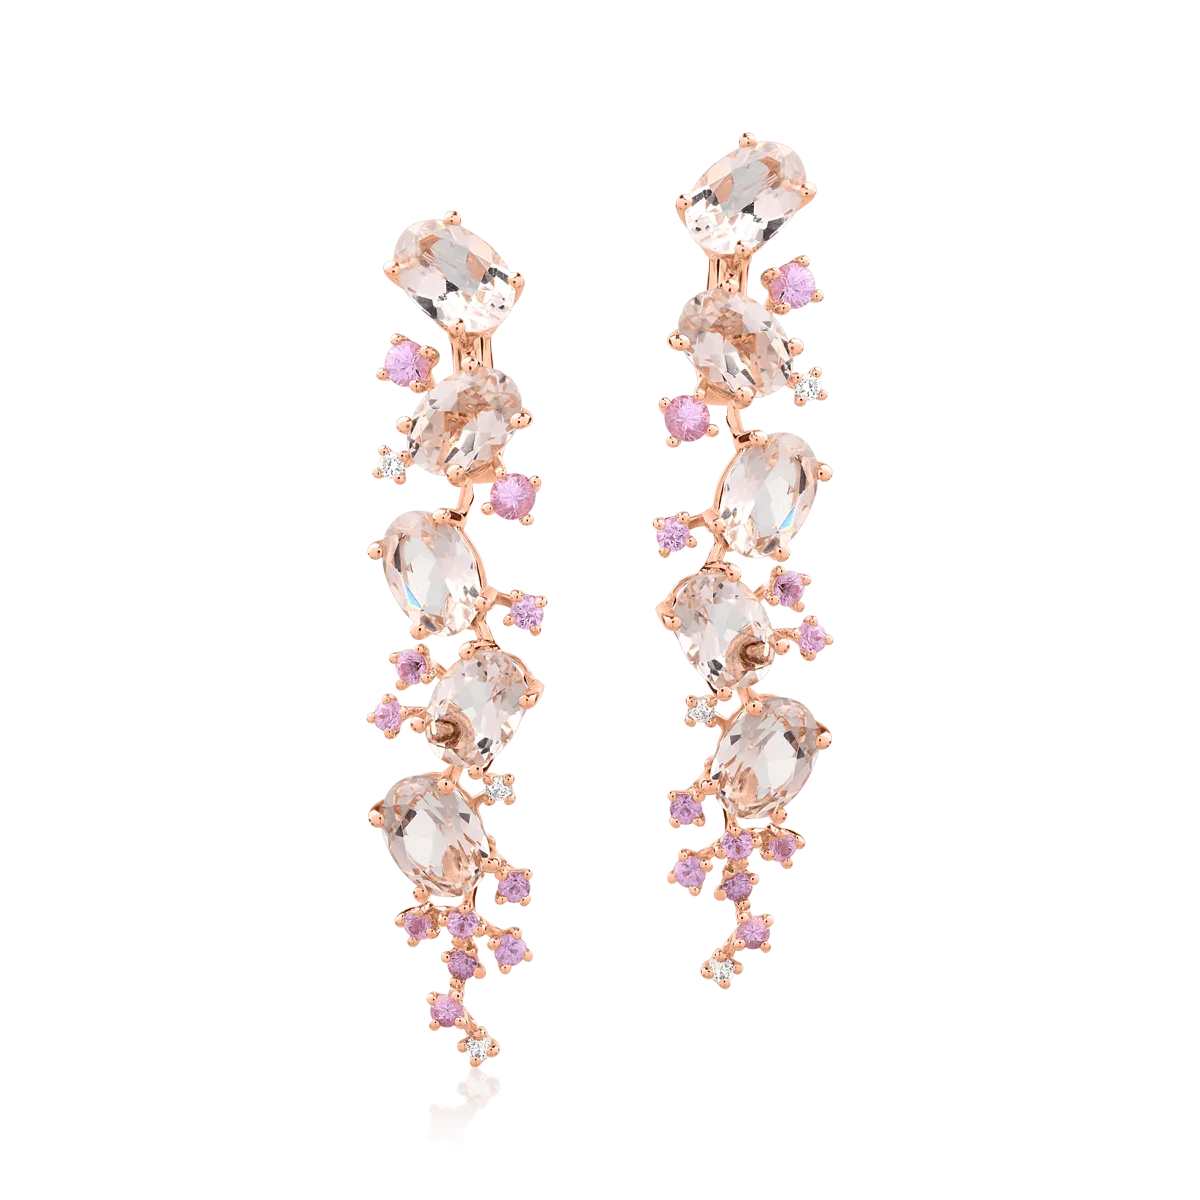 18K rose gold earrings with precious stones of 7.89ct